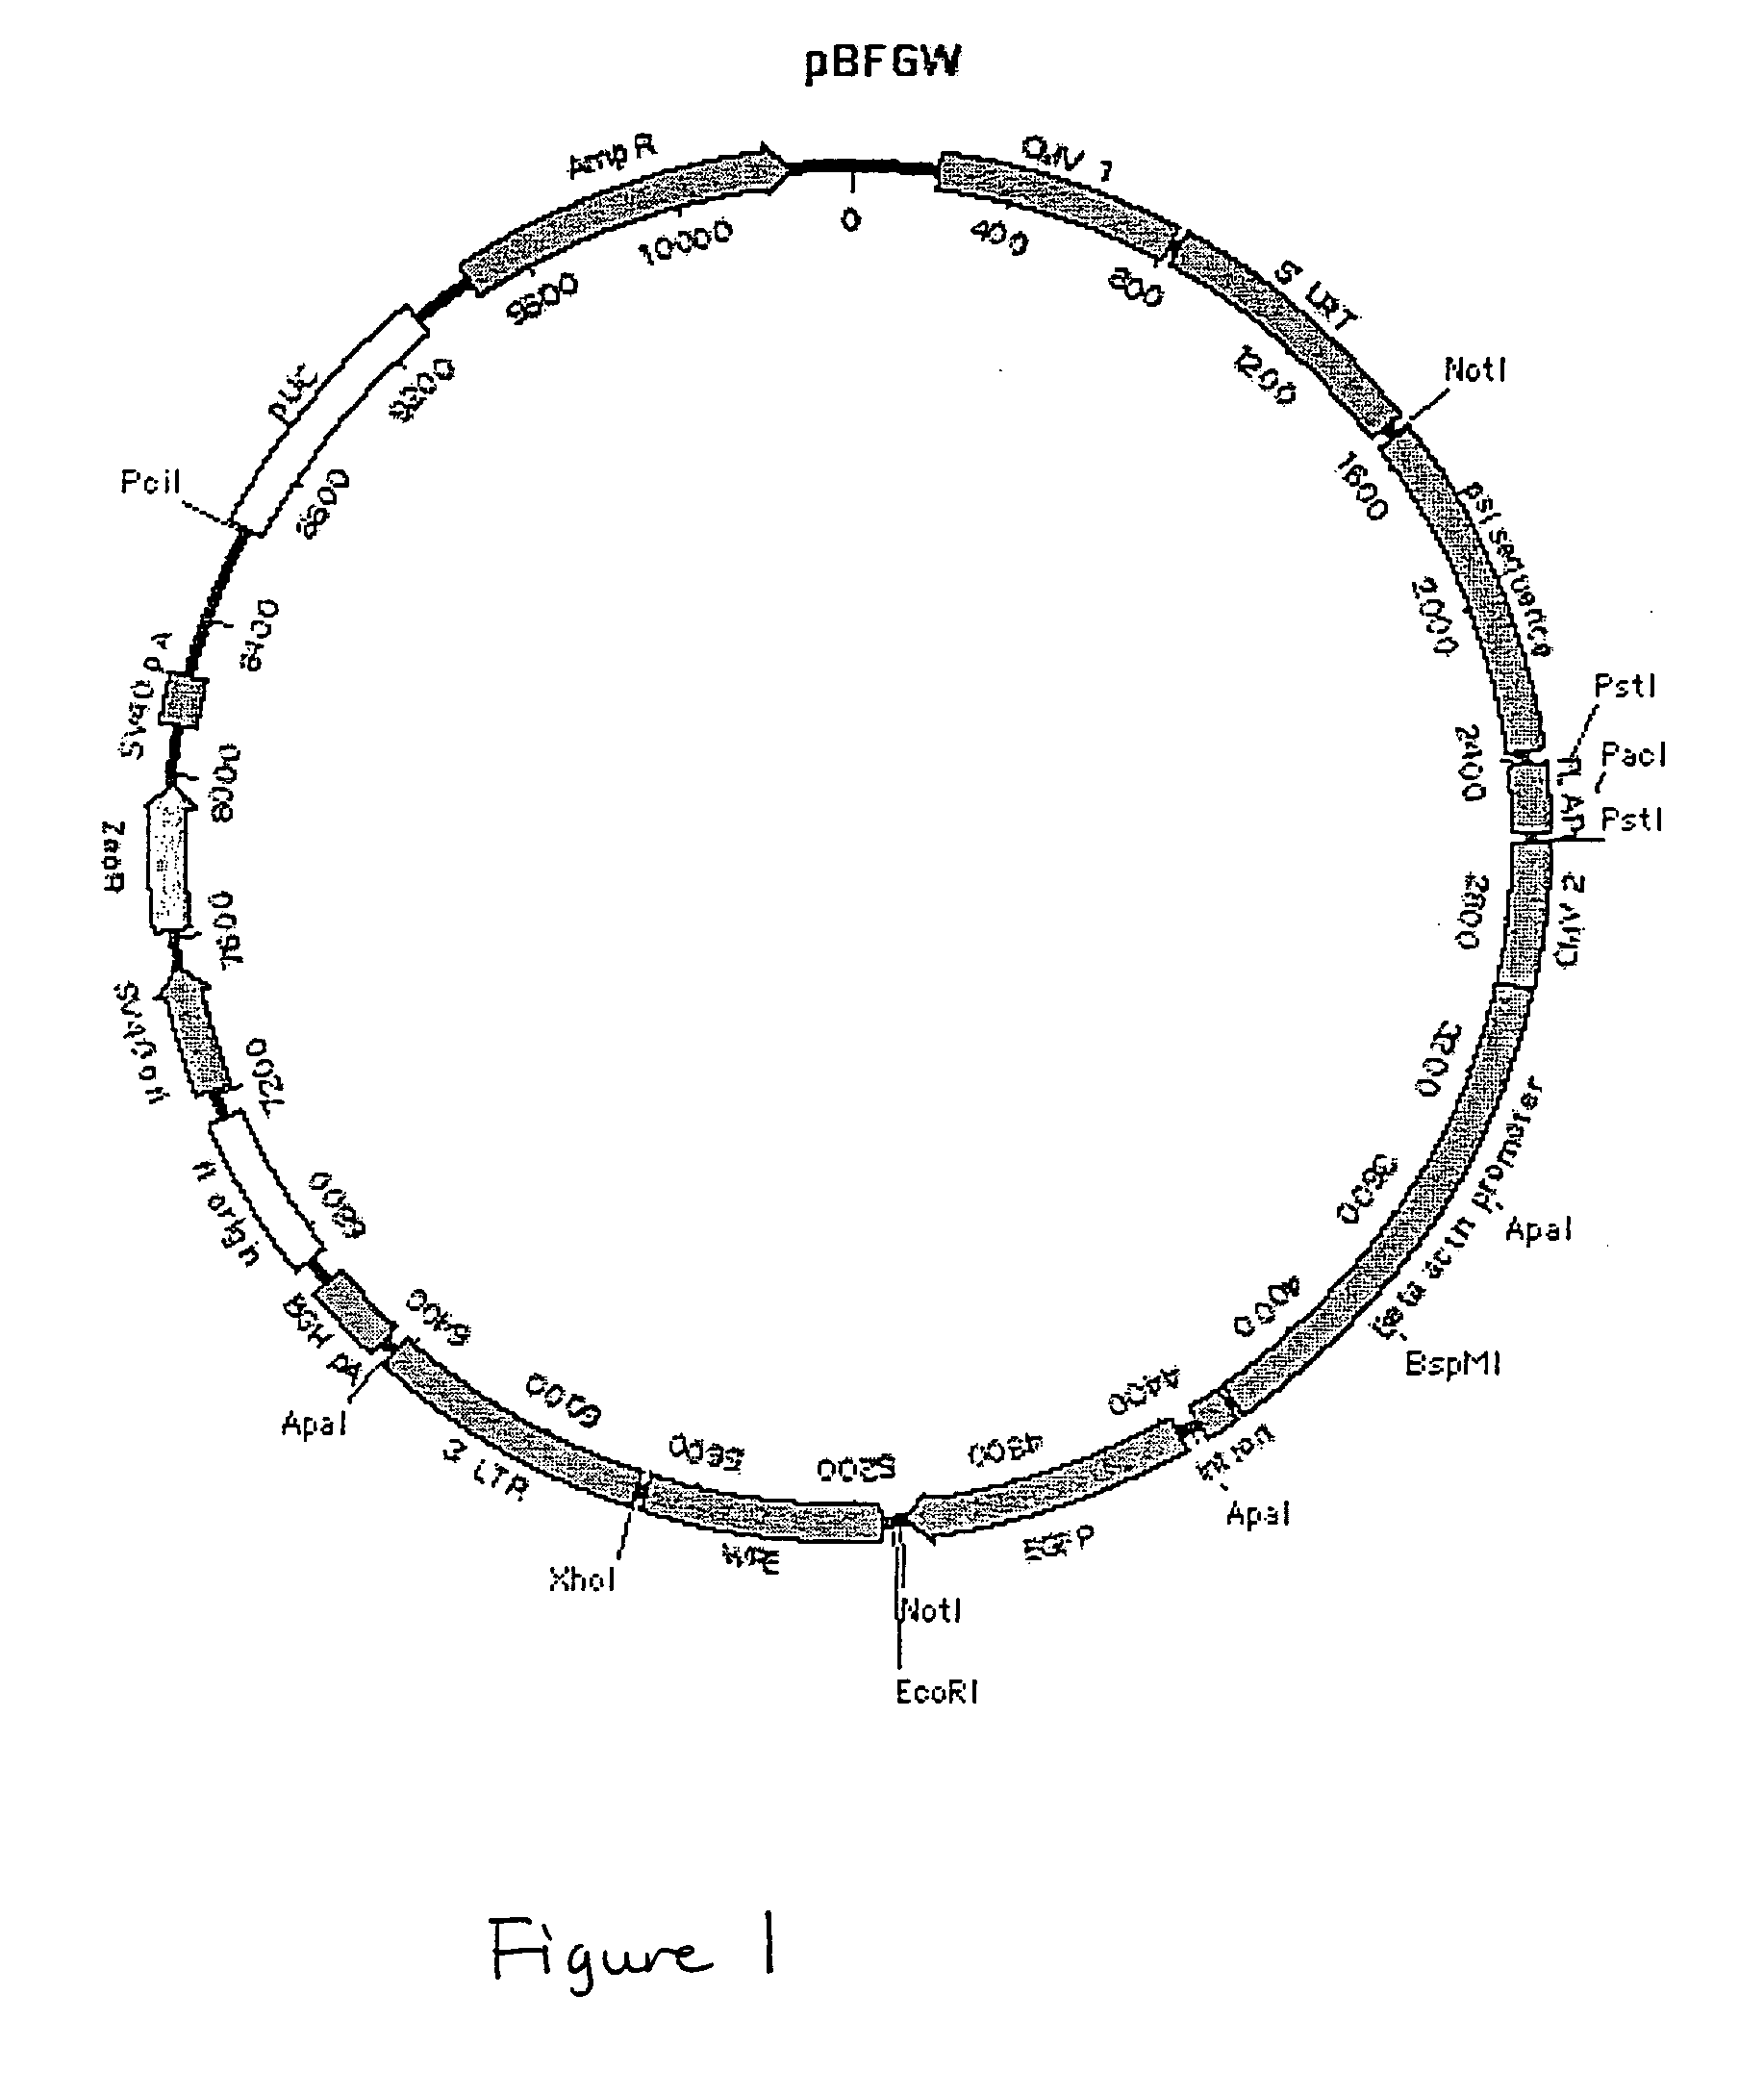 Lentiviral vectors, related reagents, and methods of use thereof